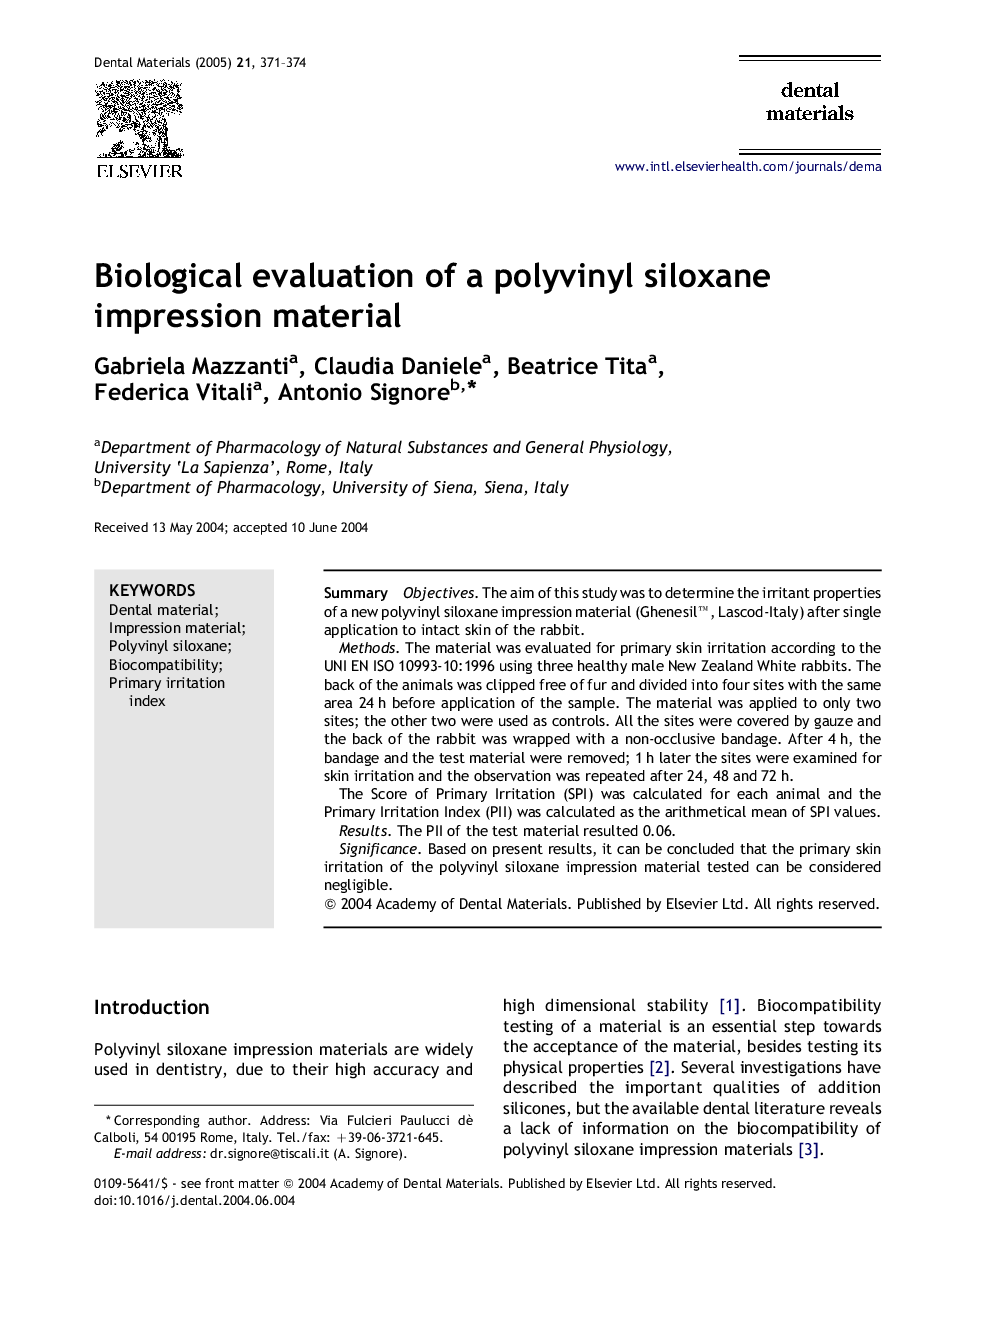 Biological evaluation of a polyvinyl siloxane impression material